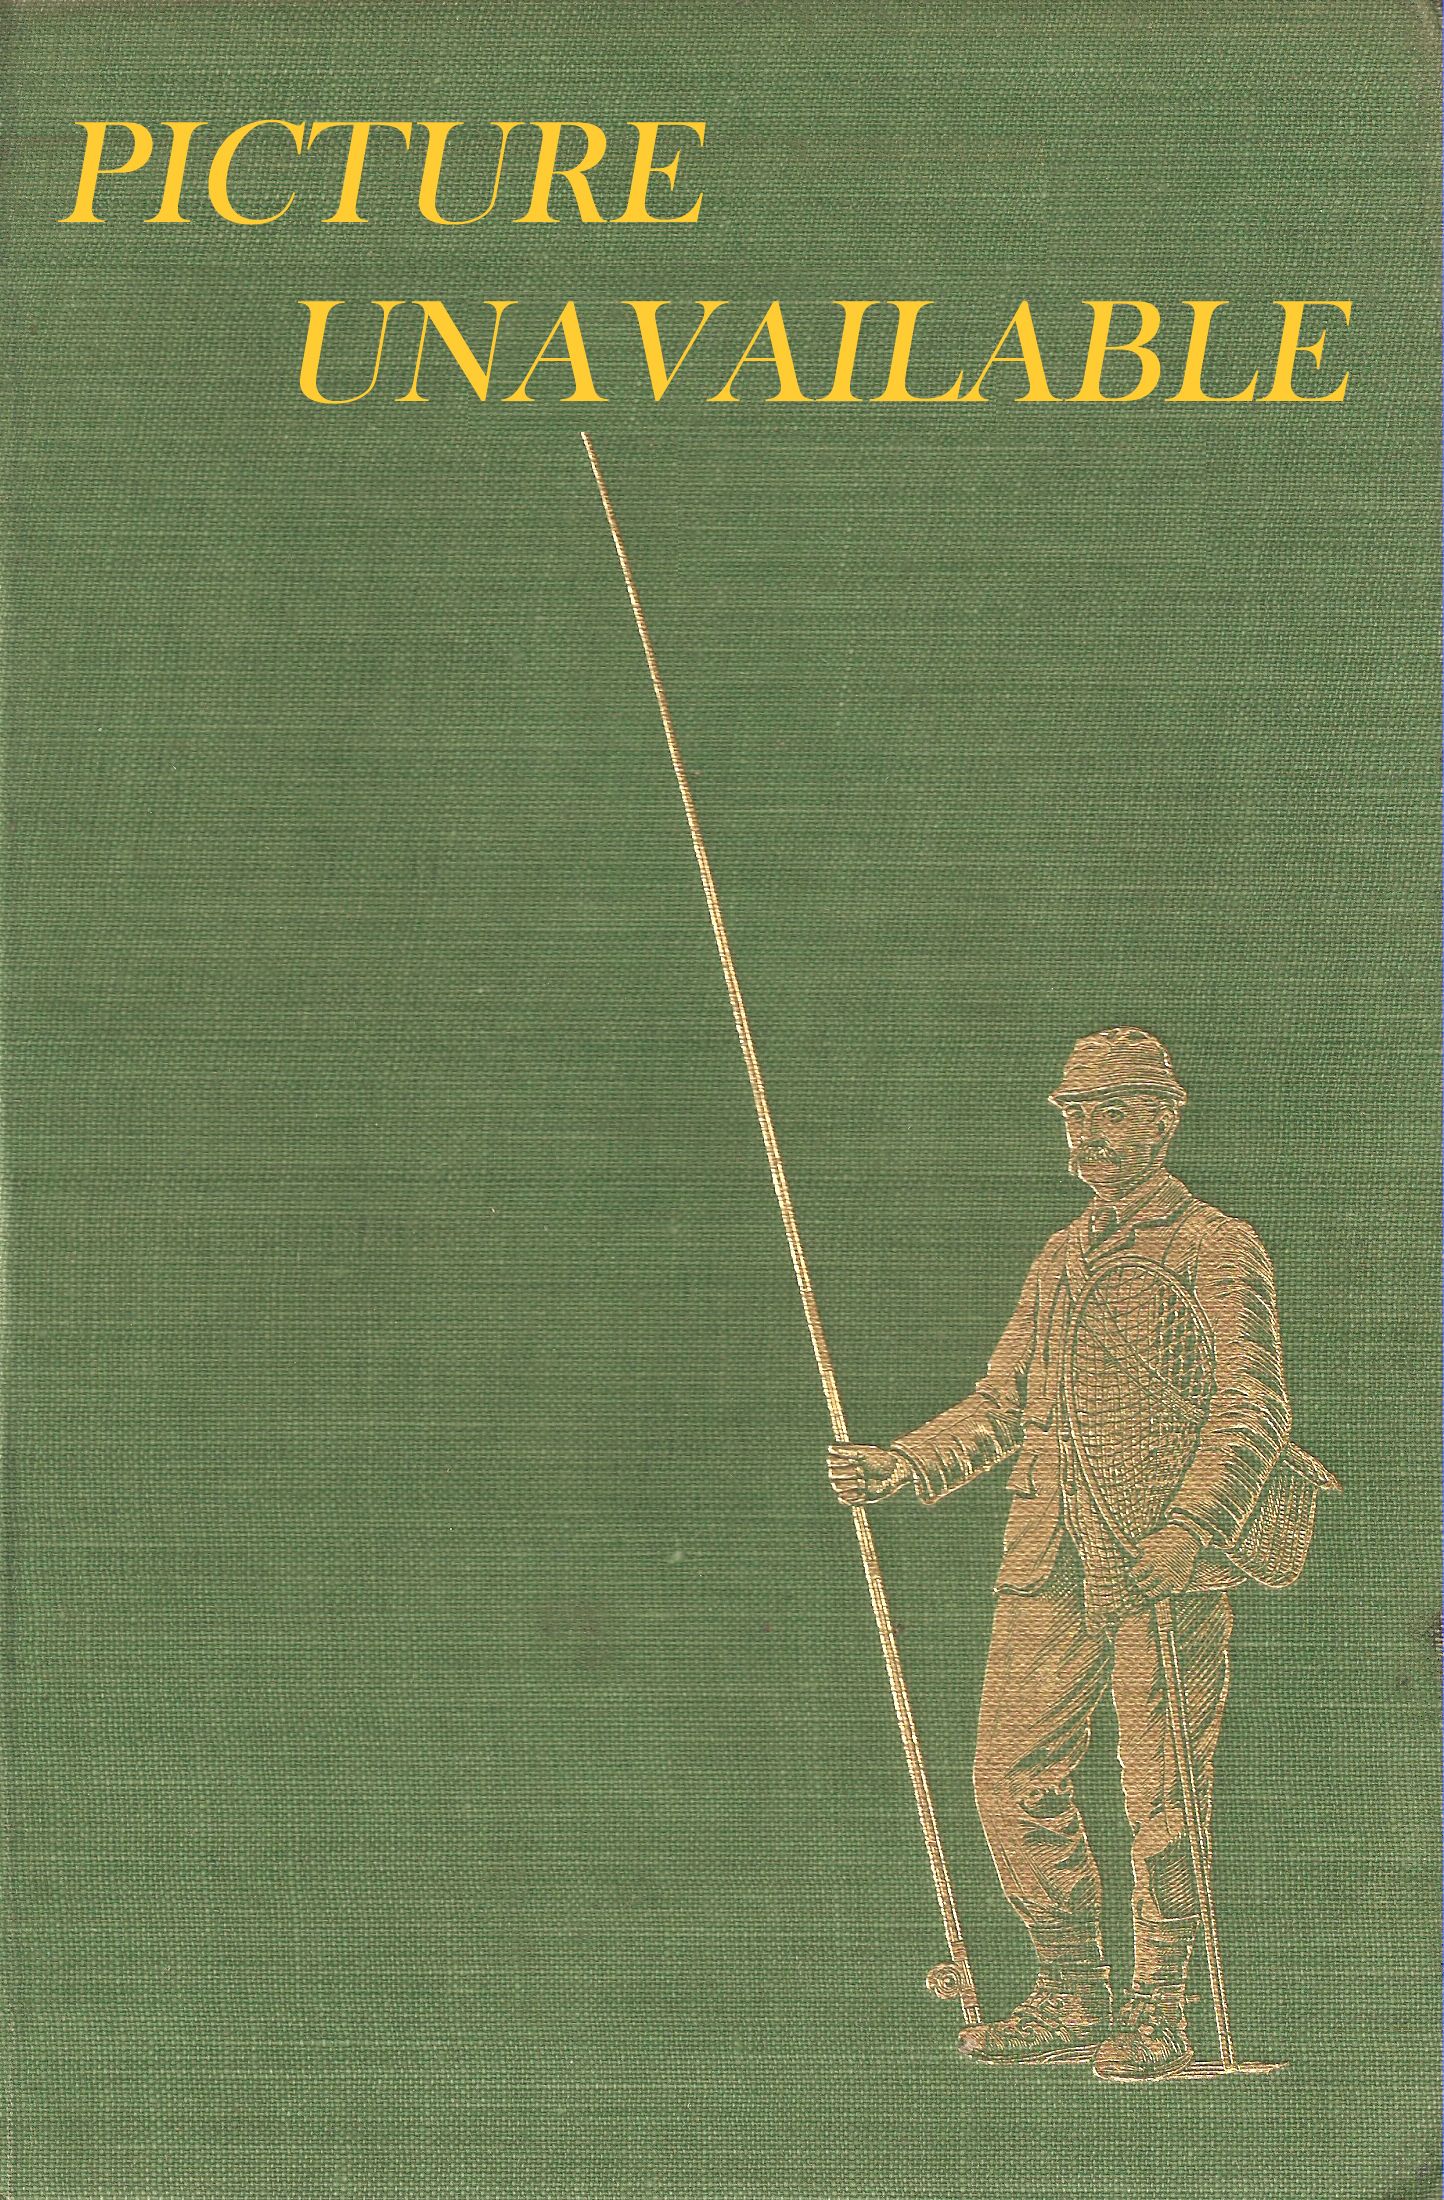 DITCHFIELD'S LITTLE WONDER BOOK No. 29. COARSE FISHING. WITH USEFUL  INFORMATION ON RODS, TACKLE AND GENERAL EQUIPMENT.